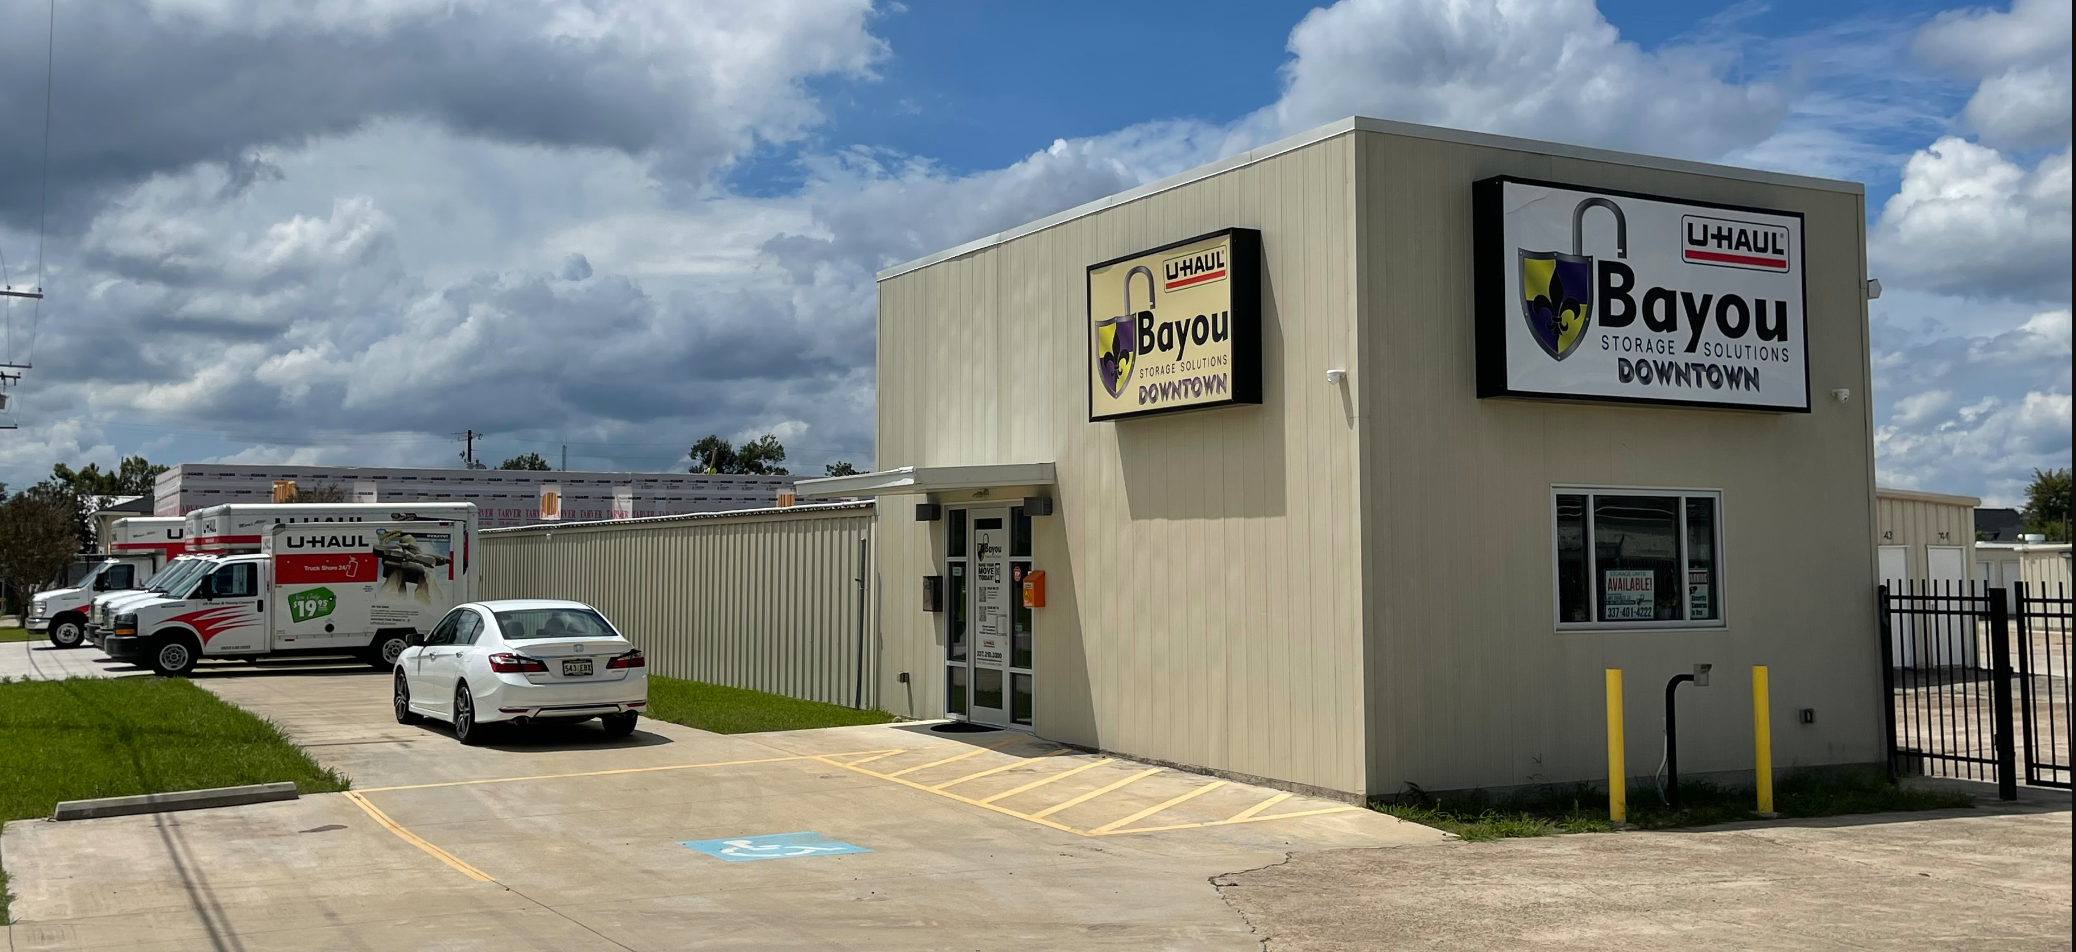 bayou self storage front office and gate